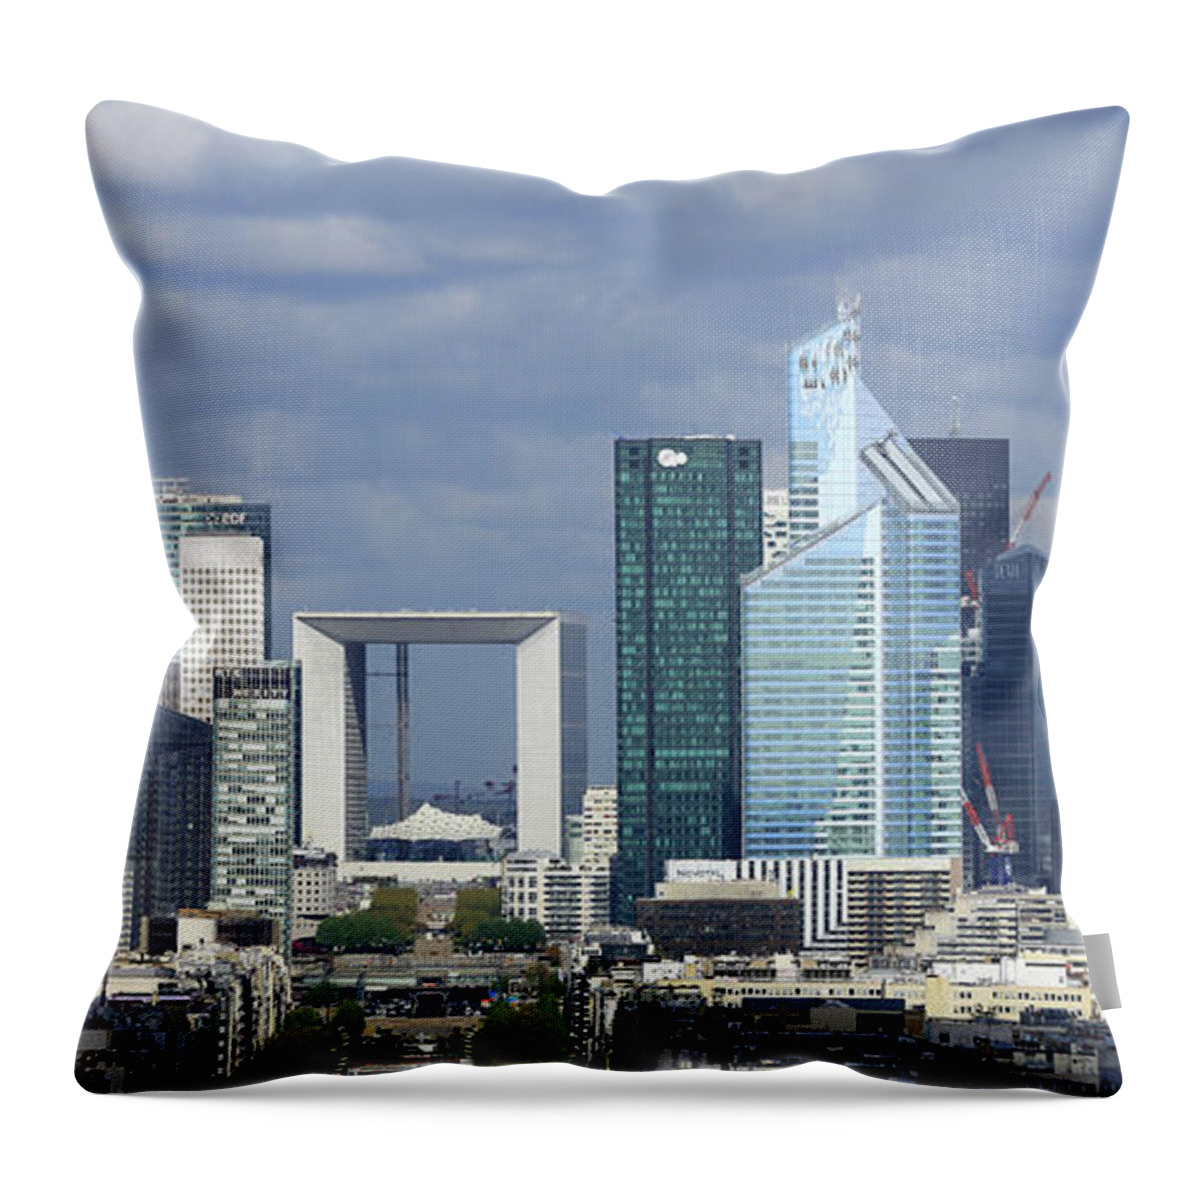 Corporate Business Throw Pillow featuring the photograph La Defense And Paris by Martial Colomb